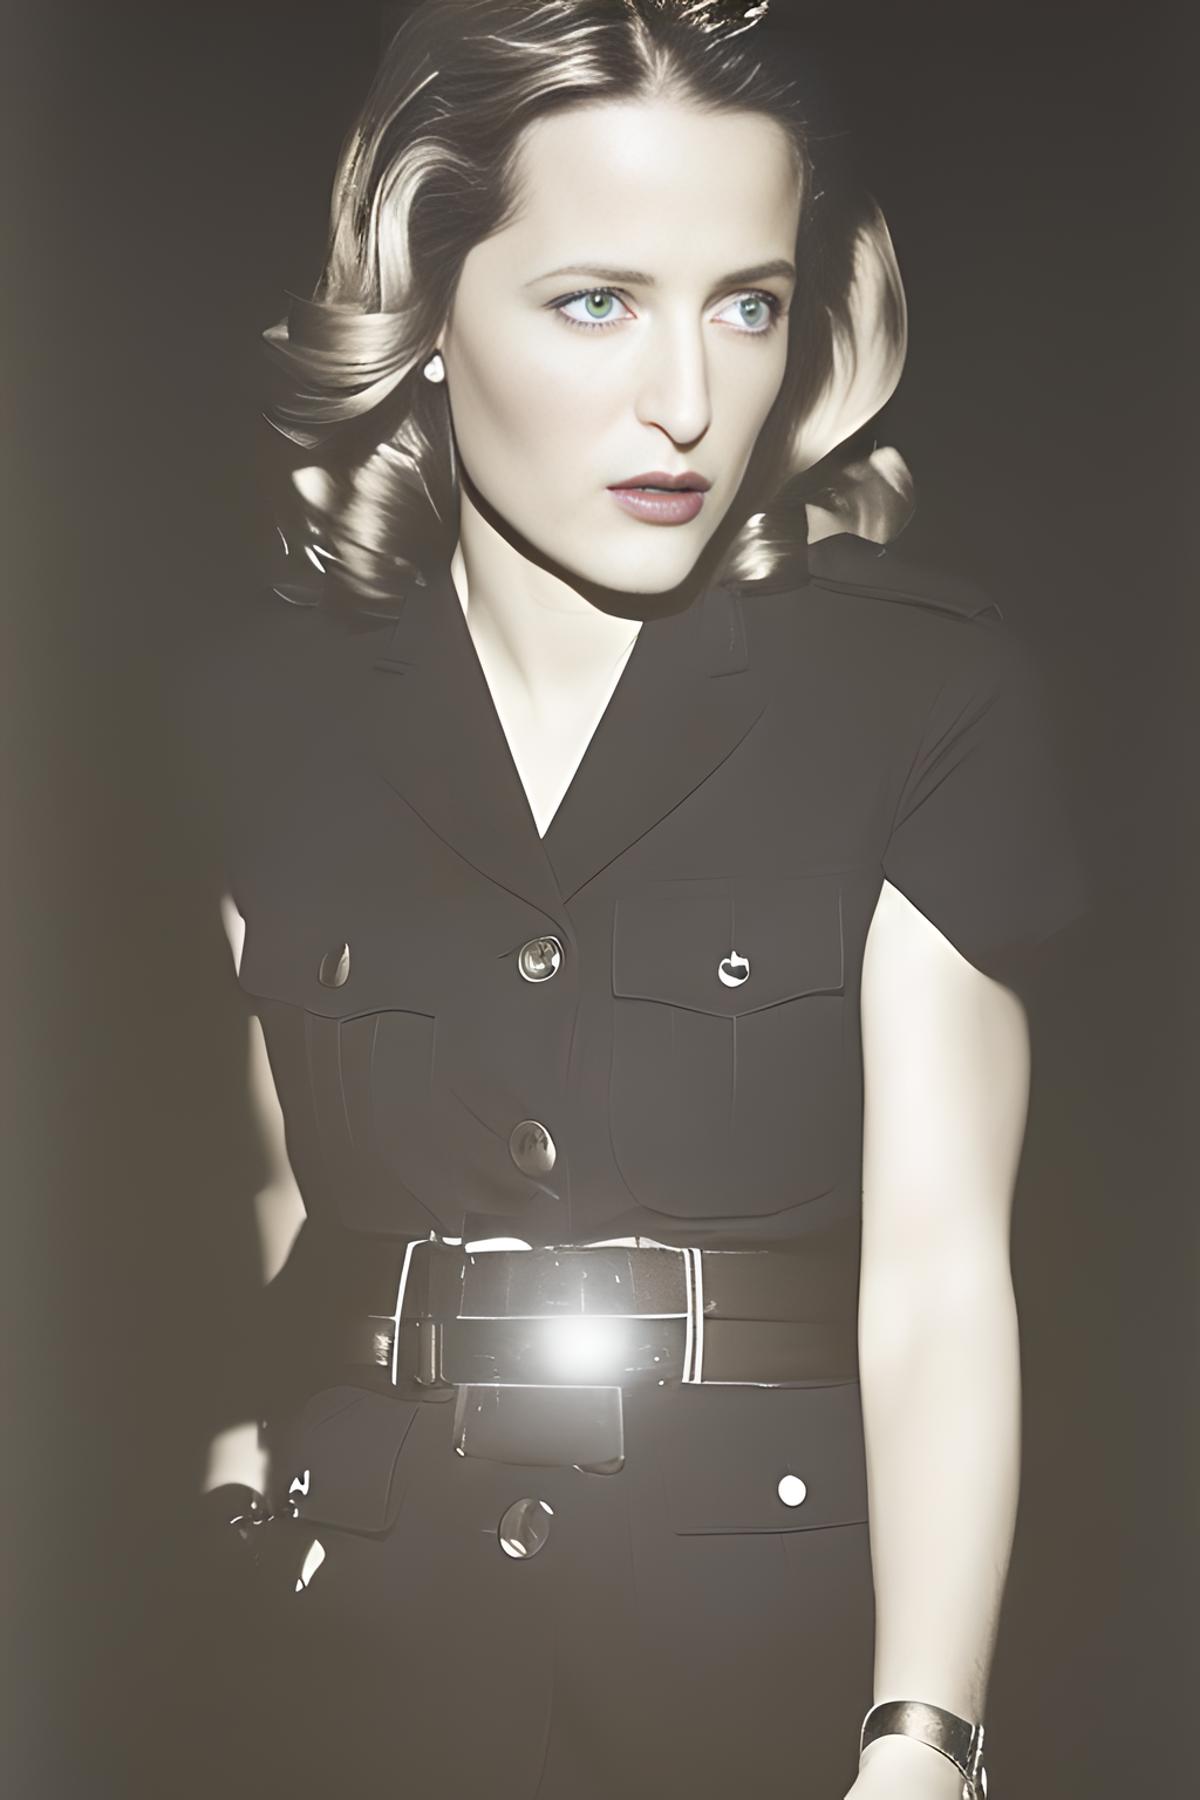 Gillian Anderson image by dbst17